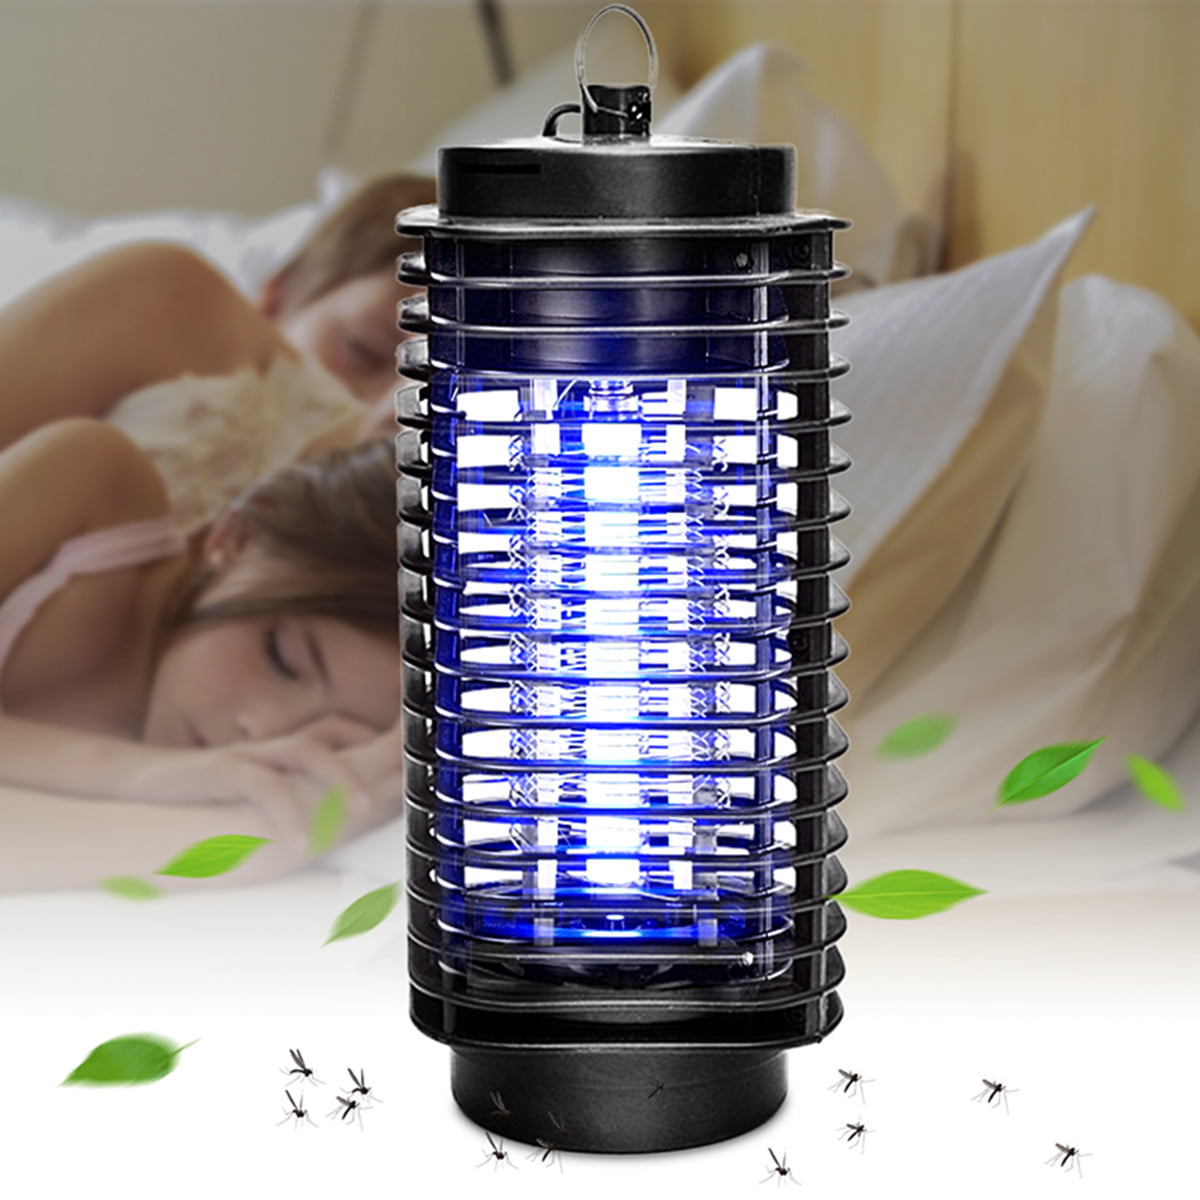 ELECTRONIC UV INSECT KILLER ELECTRIC ULTRAVIOLET MOSQUITO PEST FLY BUG ZAPPER'UK 